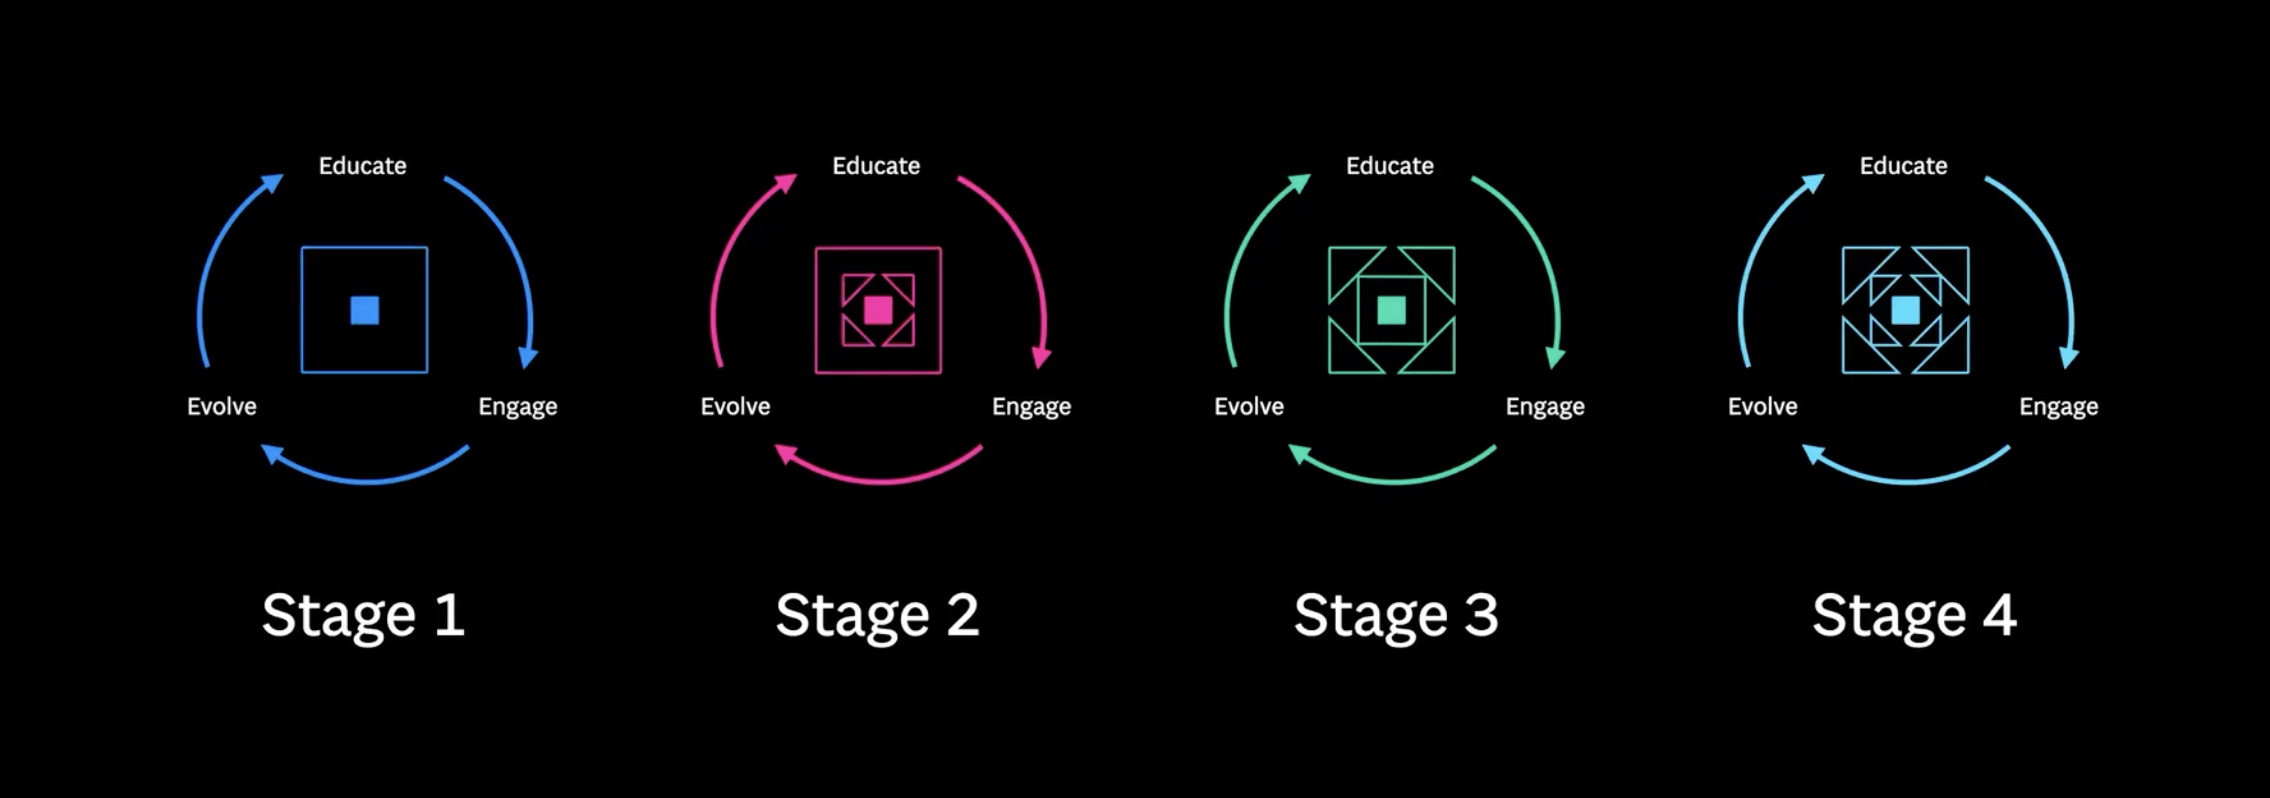 Graph showing how Educate, Engage and Evolve works as a circle on each of the stages 1 to 4.